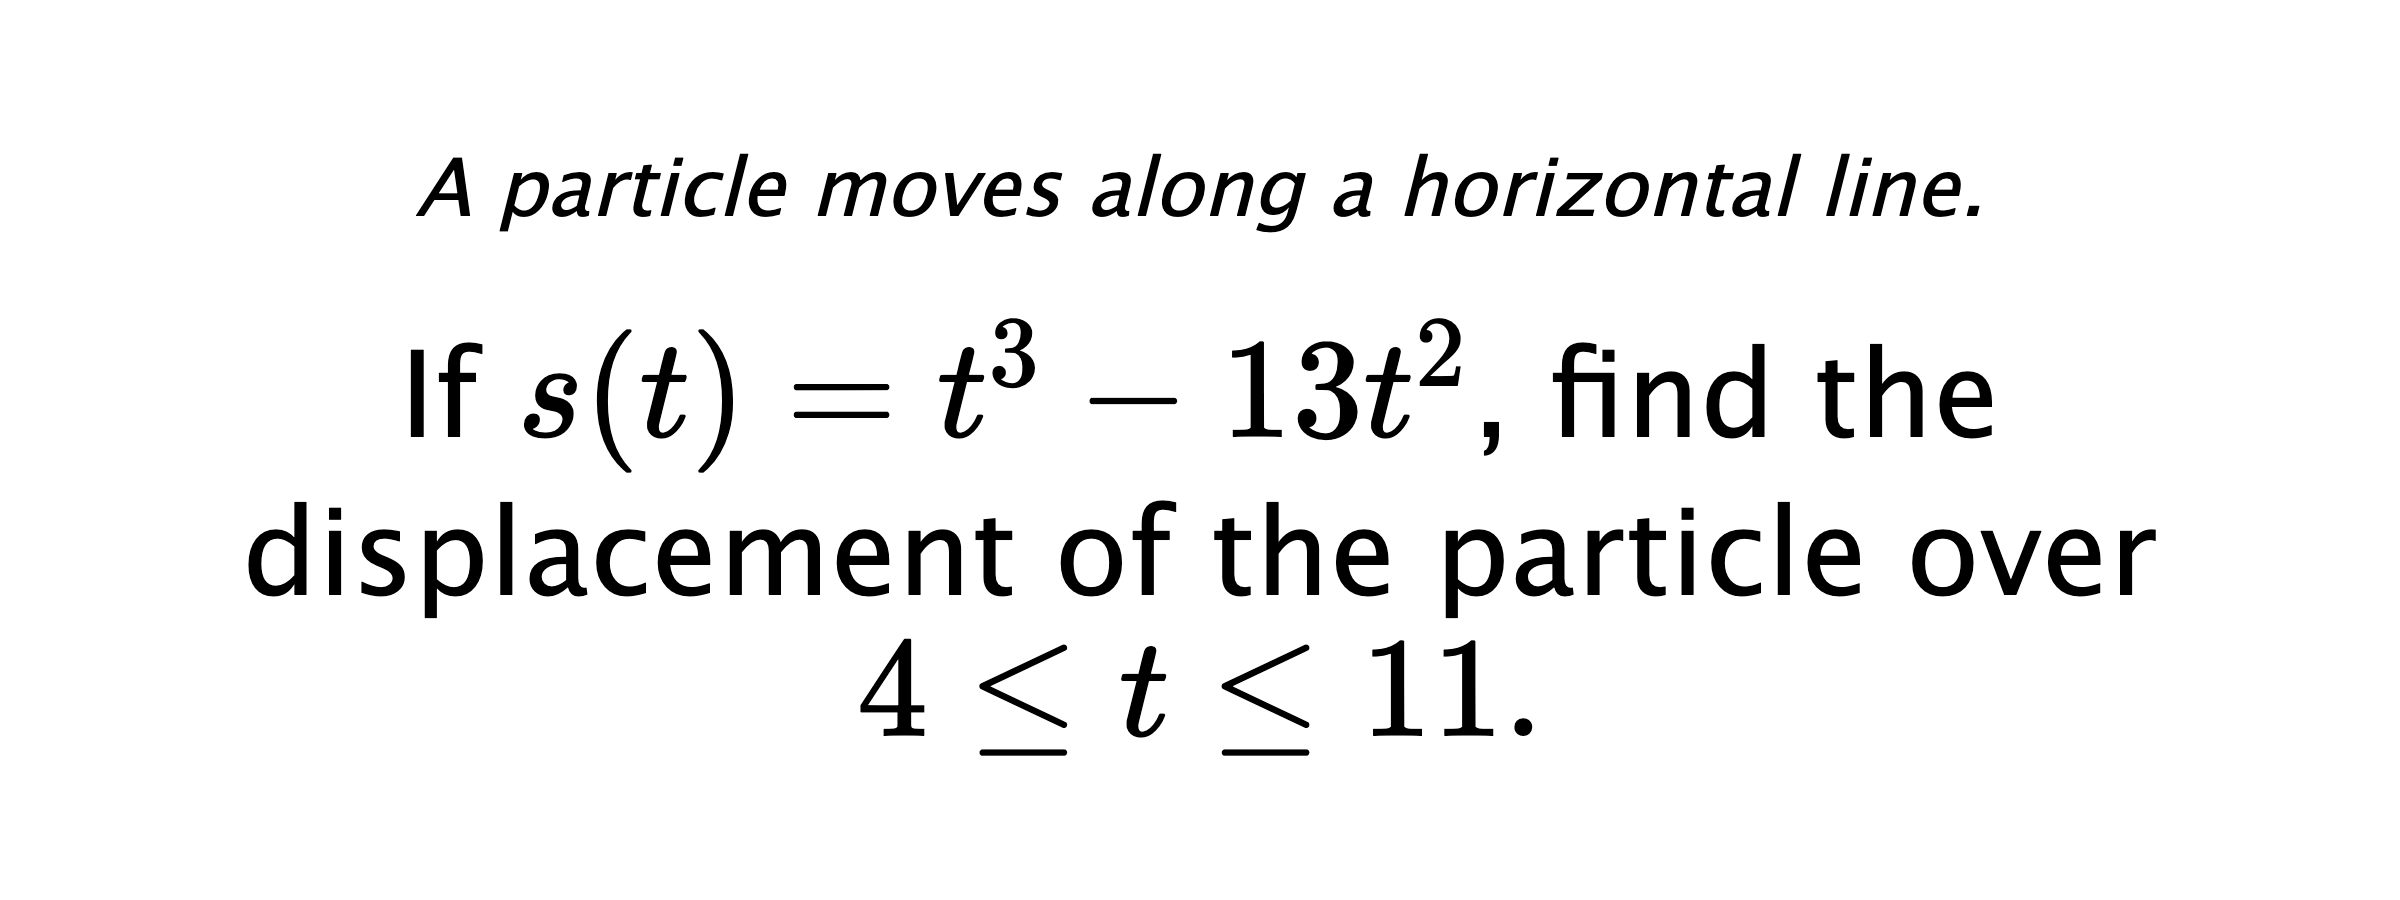 A particle moves along a horizontal line. If $ s(t)=t^3-13t^2 $, find the displacement of the particle over $ 4 \leq t \leq 11 .$